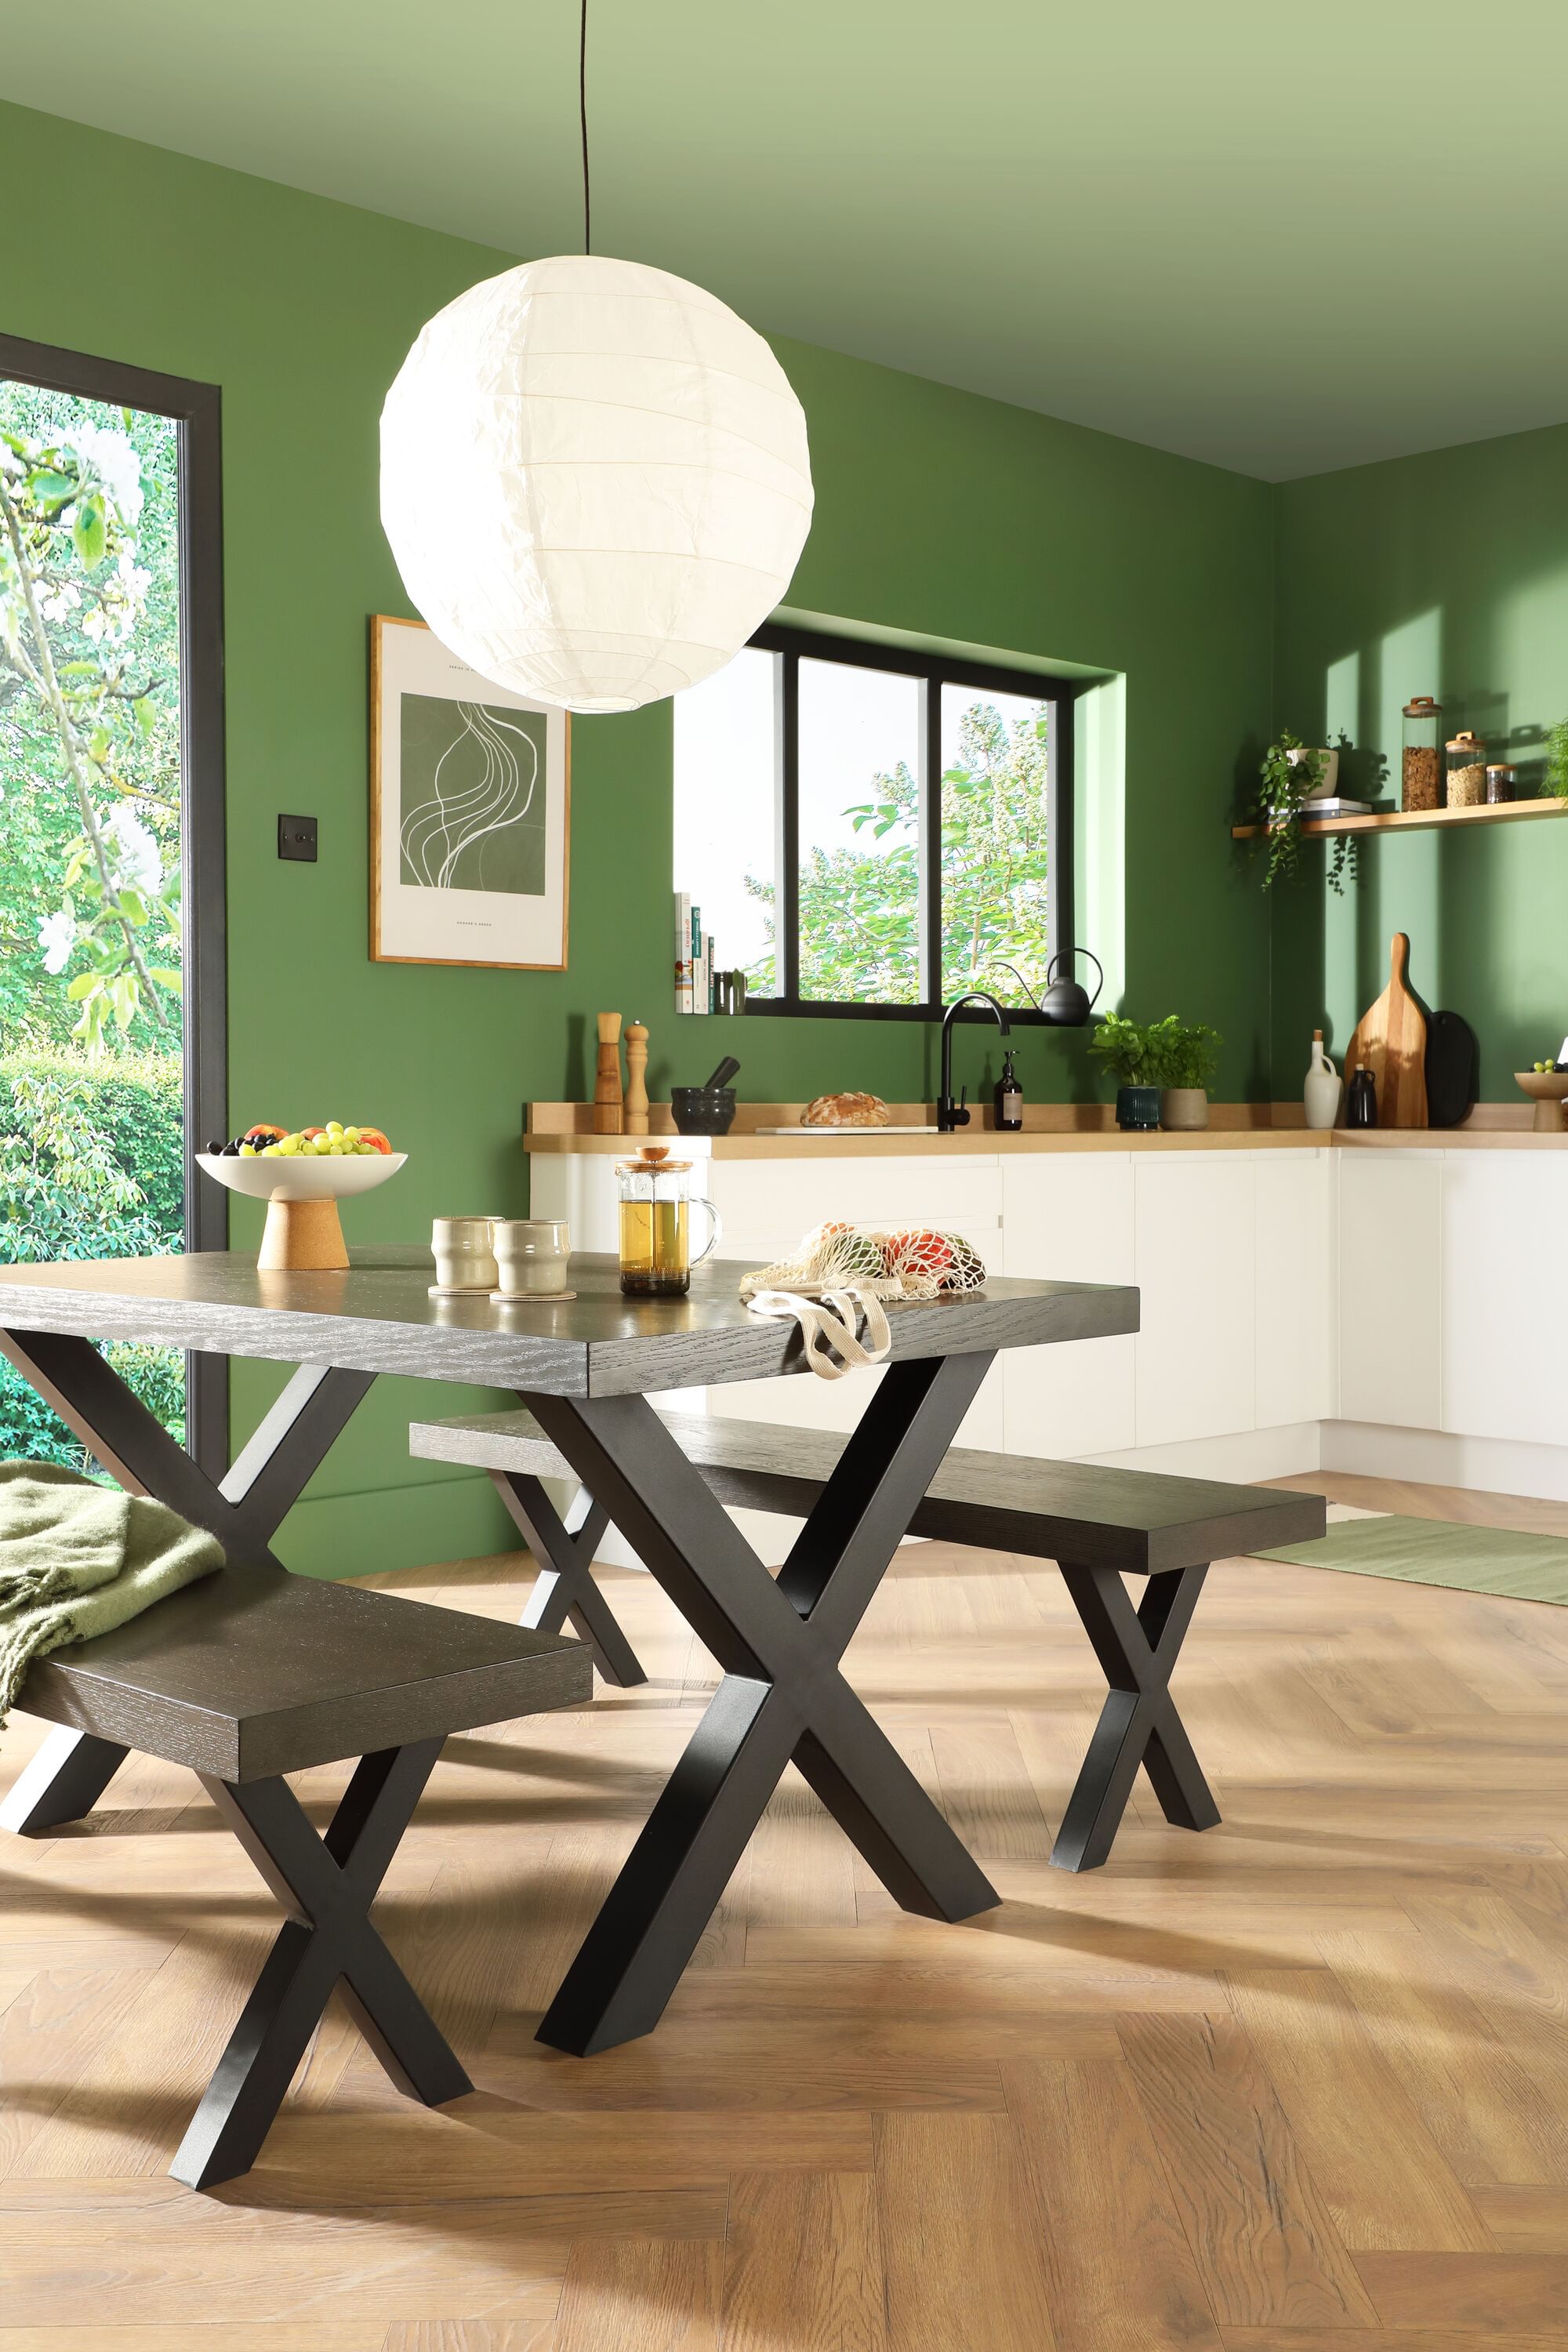 Forest greenwalls and grey dining set in kitchen-diner